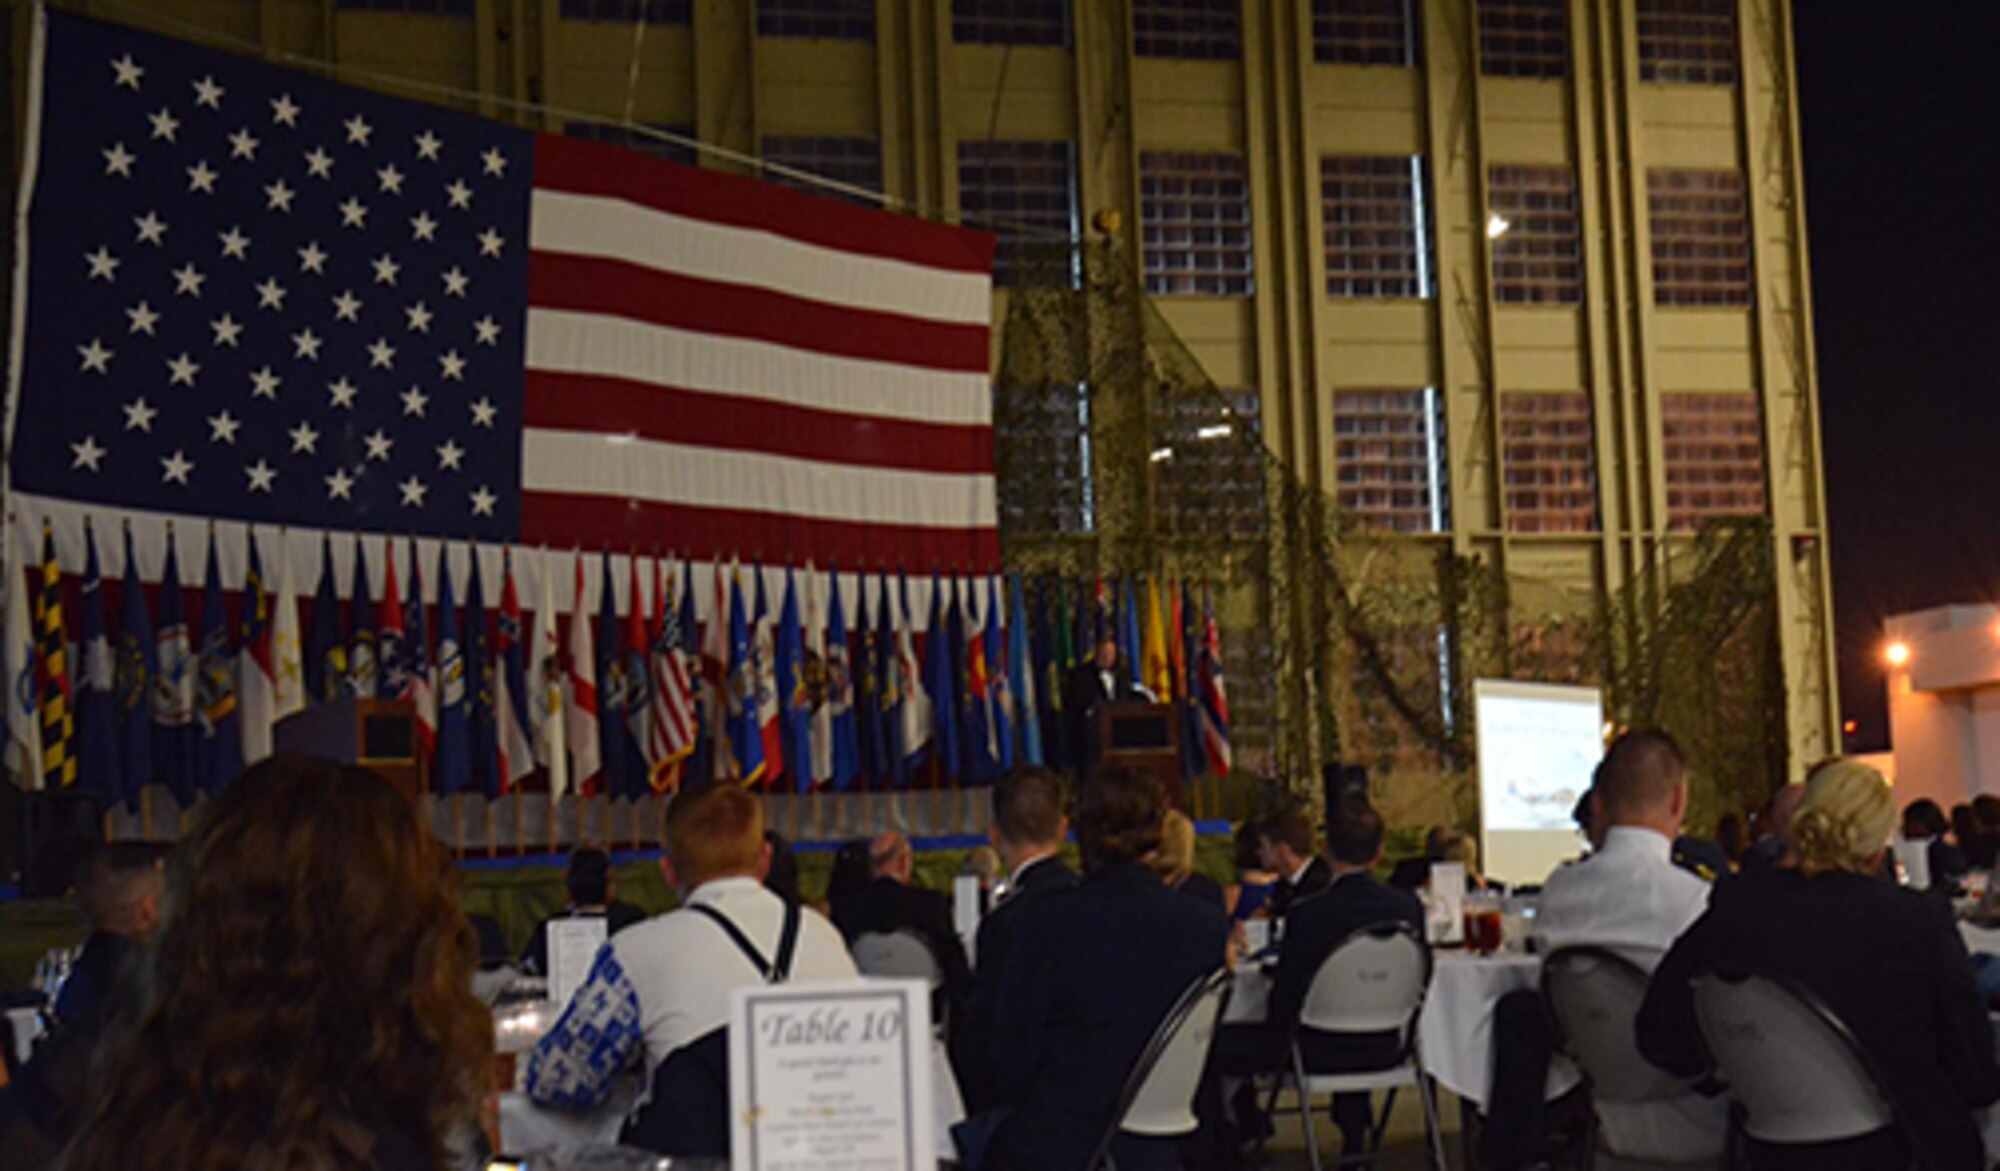 Retired U.S. Air Force Gen. Philip Breedlove, former supreme commander of NATO forces in Europe, addresses service members during the Air Force Ball held in historic King Hangar Oct. 15 Eglin Air Force Base, Florida. The event, hosted by the 96th Test Wing, was organized by a committee comprised of the Company Grade Officers Council and First Sergeants Association. More than 600 service members shared the hangar with an F-15, F-35, A-10, and AC-130W aircraft and a weapons display. (U.S. Air Force Photo/Linda Phillips)